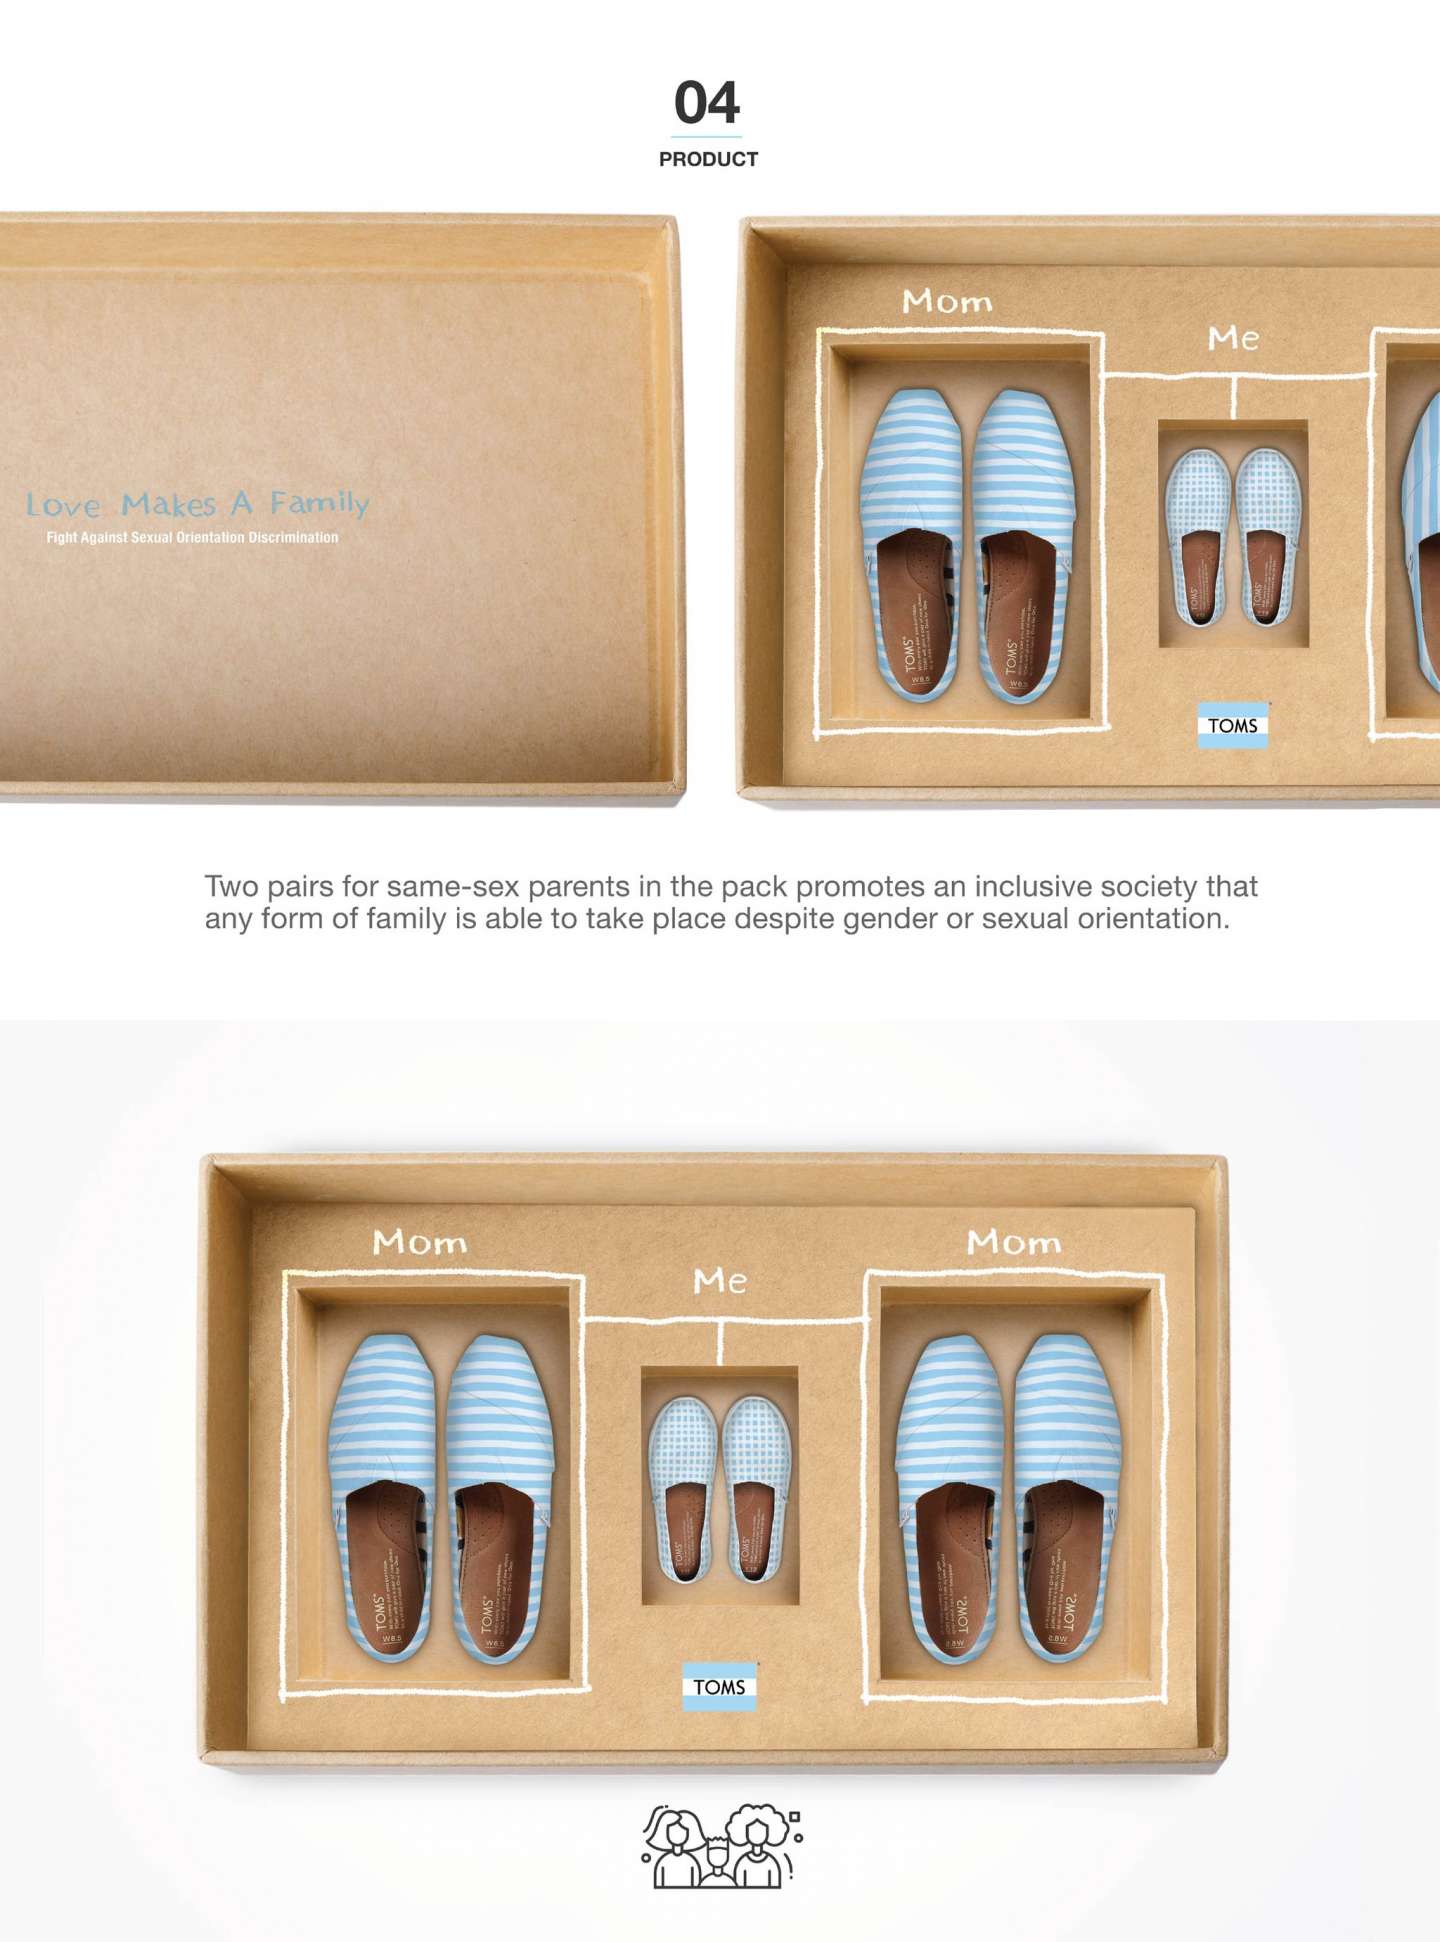 TOMS - Family Pack